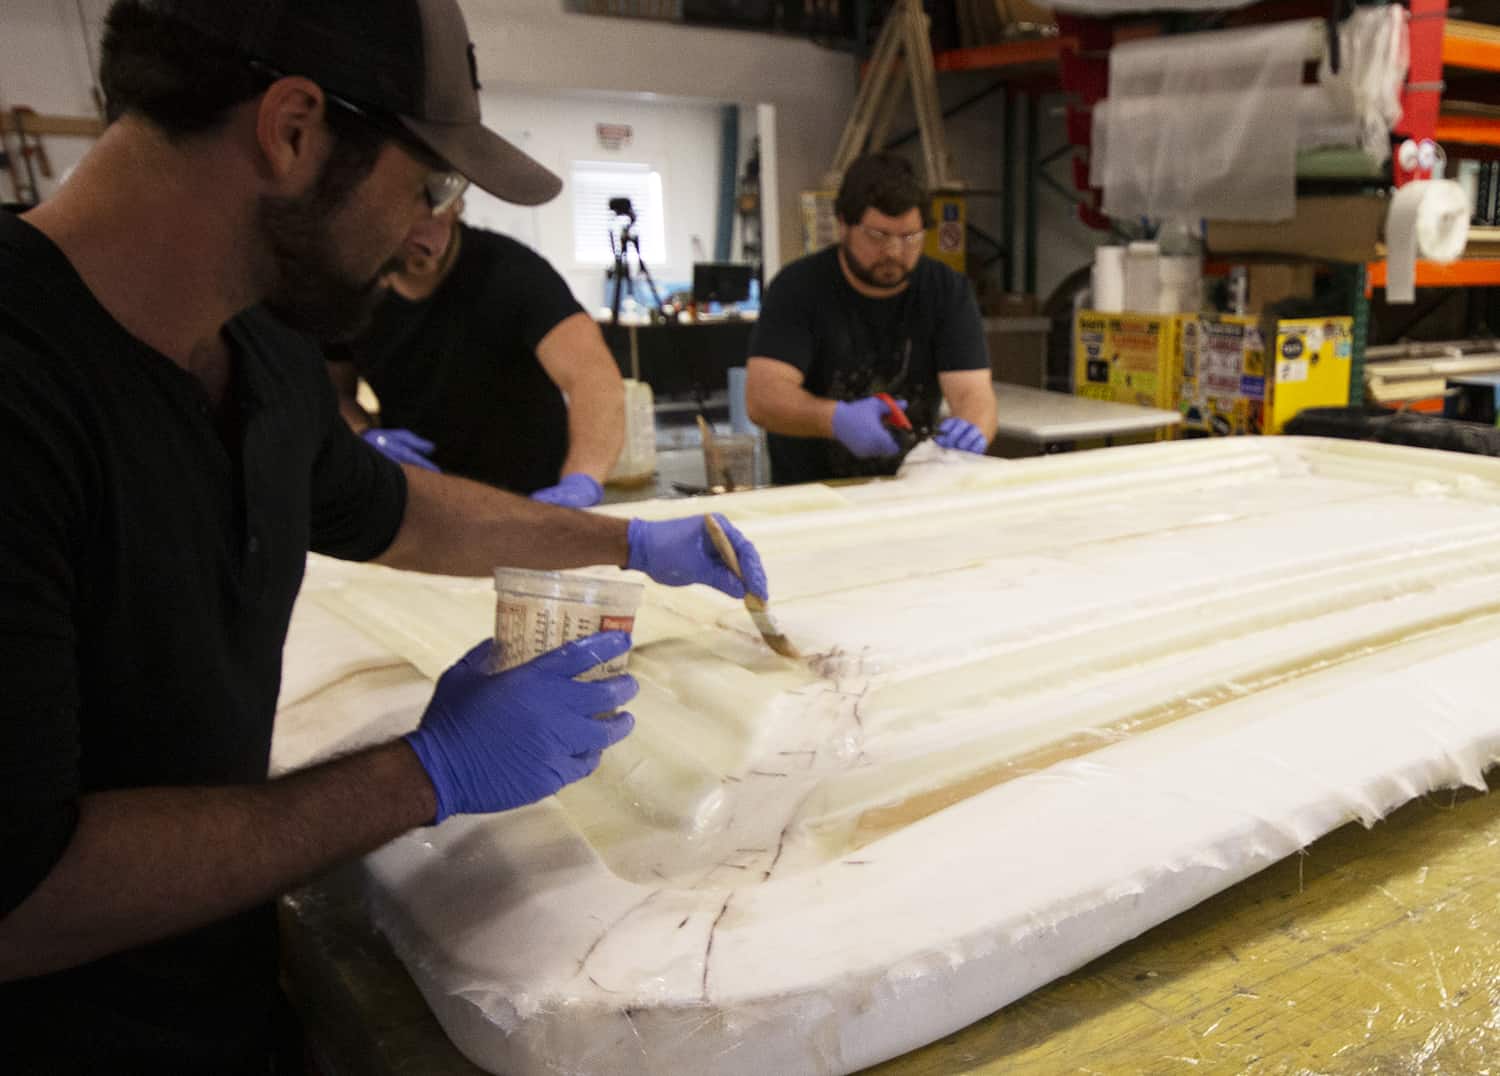 3 men in black t-shirts and purple gloves applying epoxy to fiberglass sheets on a foam mold.